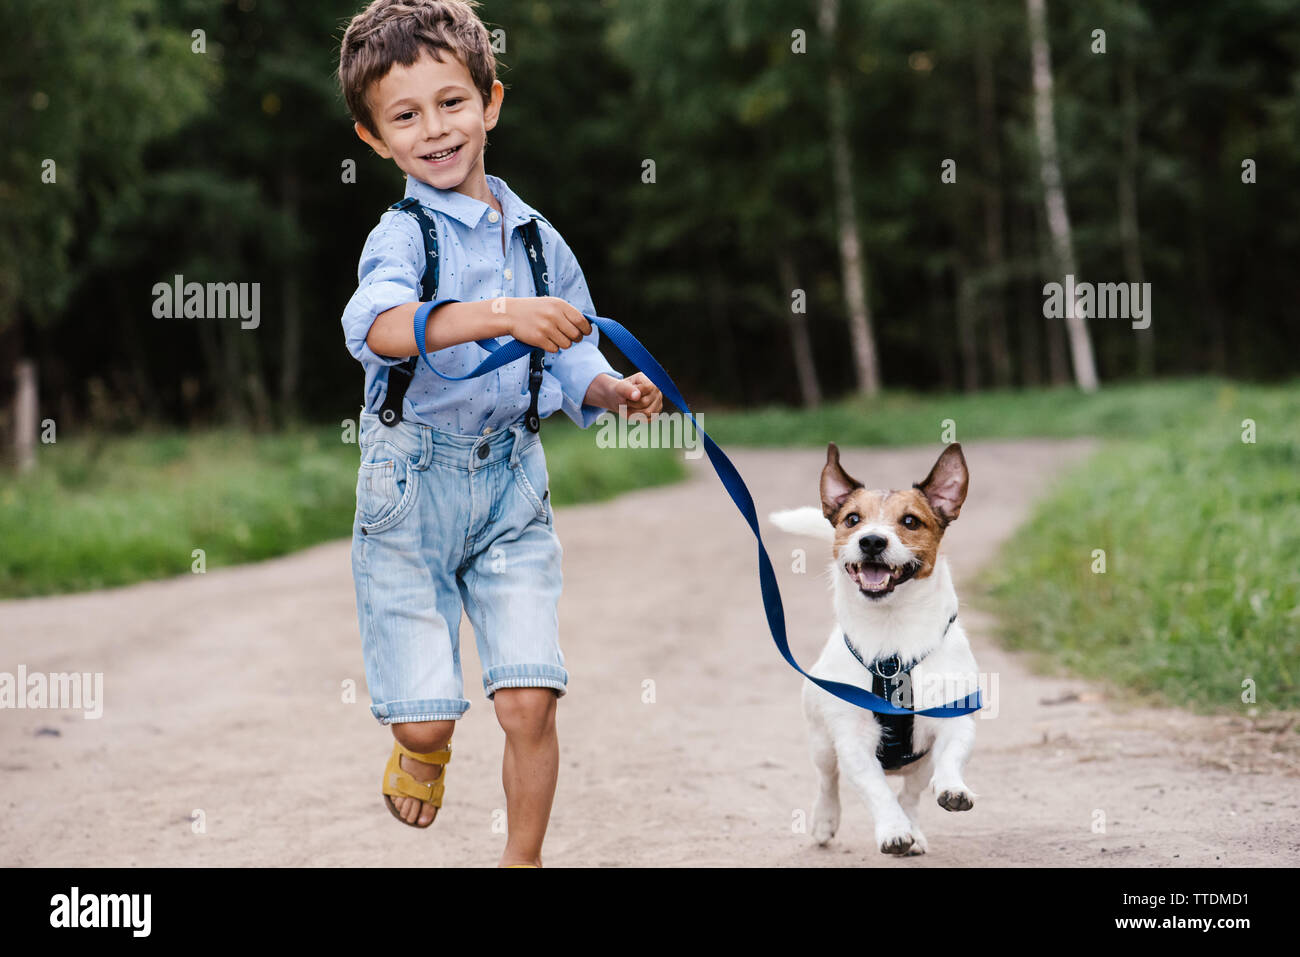 Happy boy with dog on leash running at country road Stock Photo